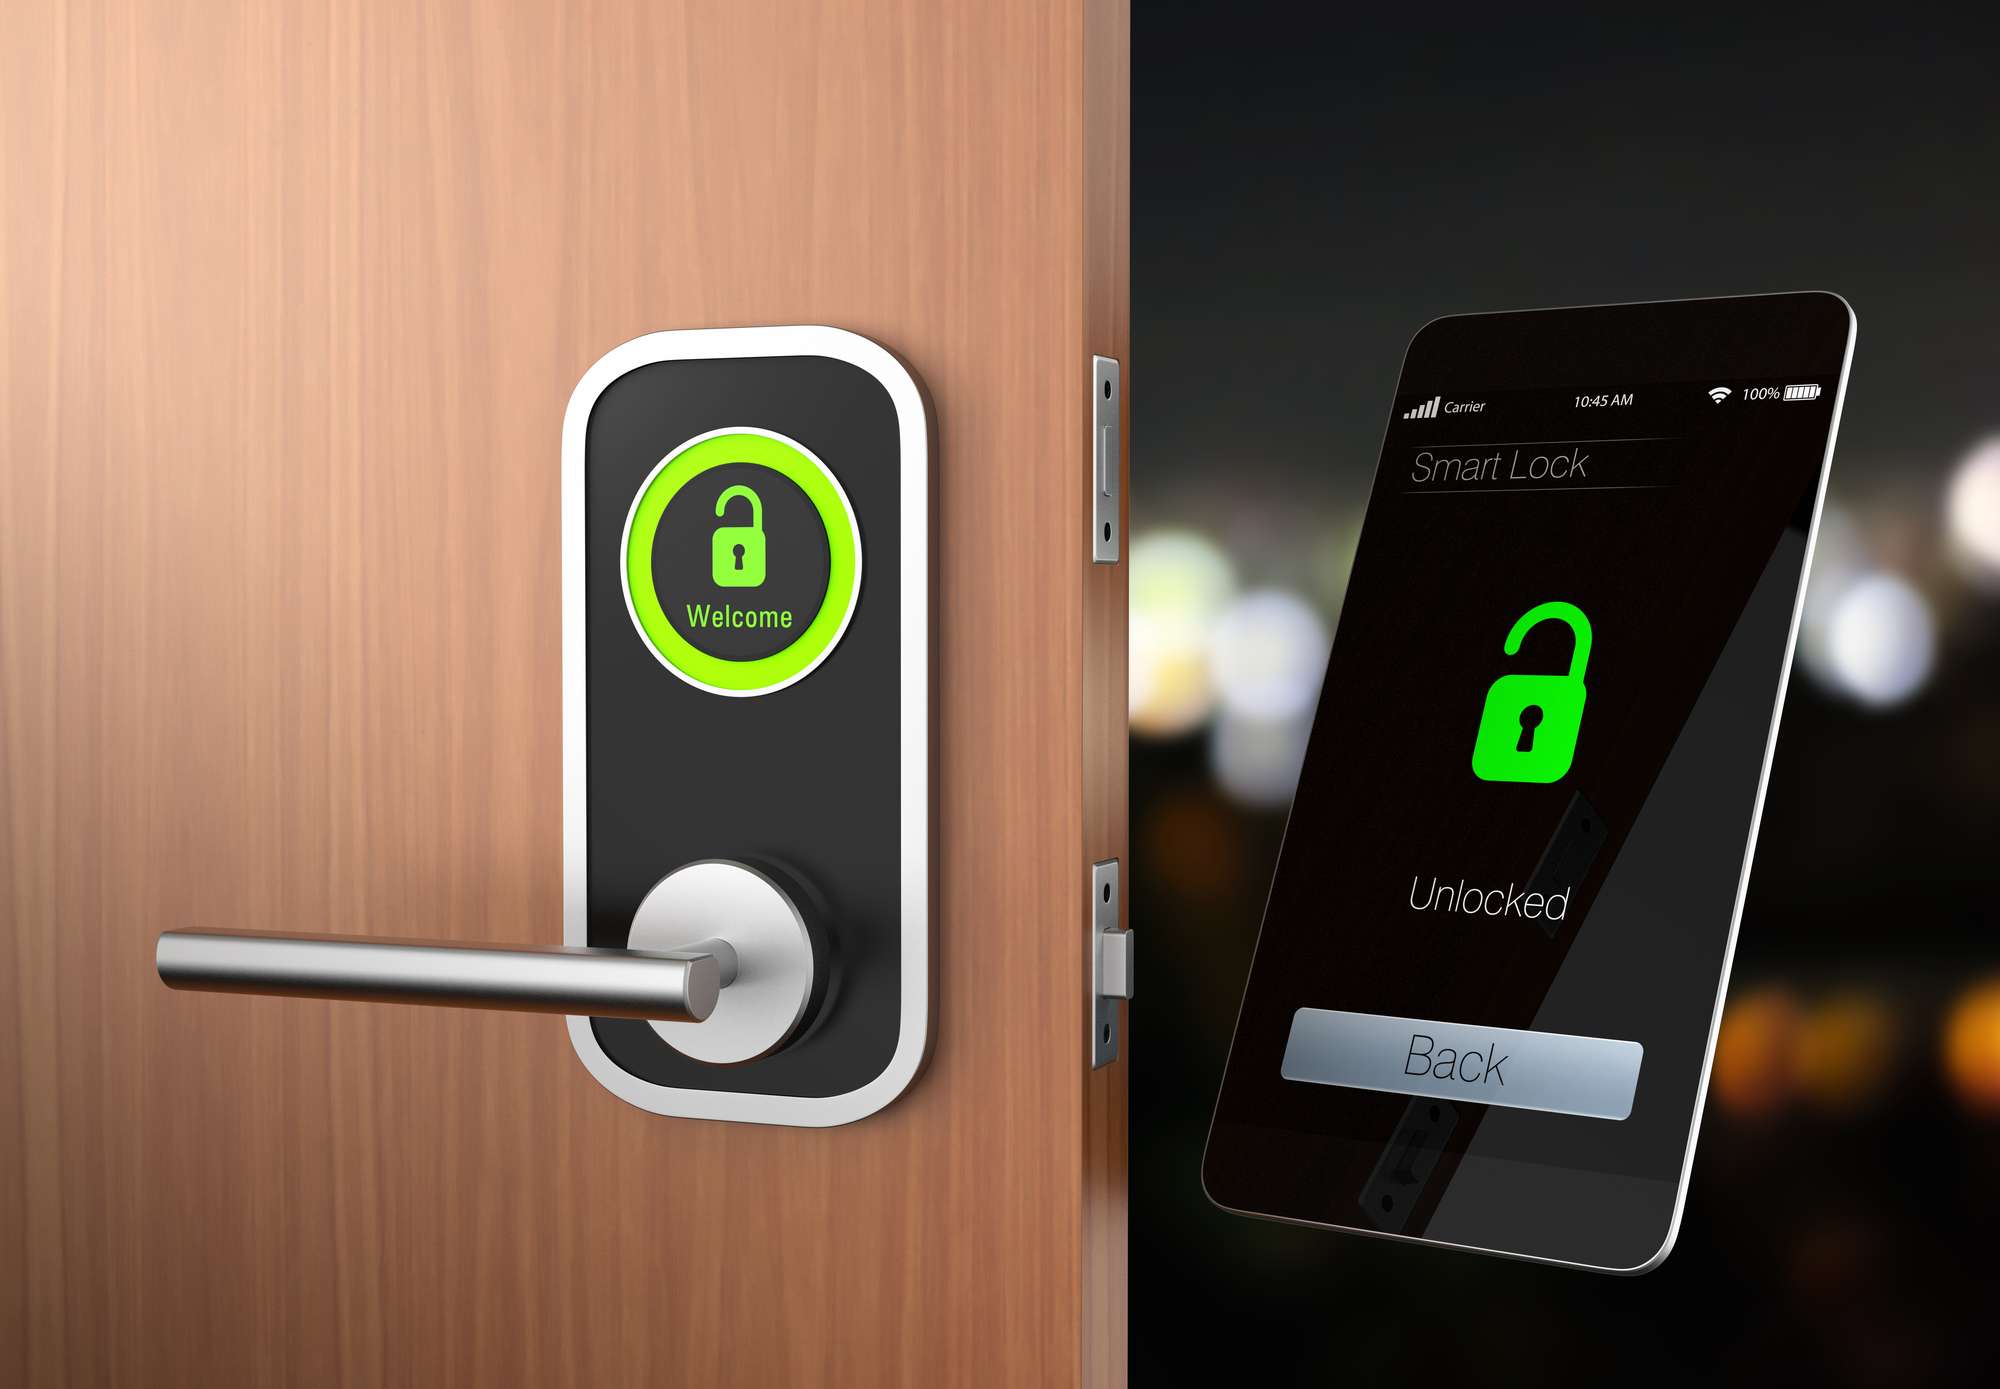 Smart locks are part of the expanding IoT Products line